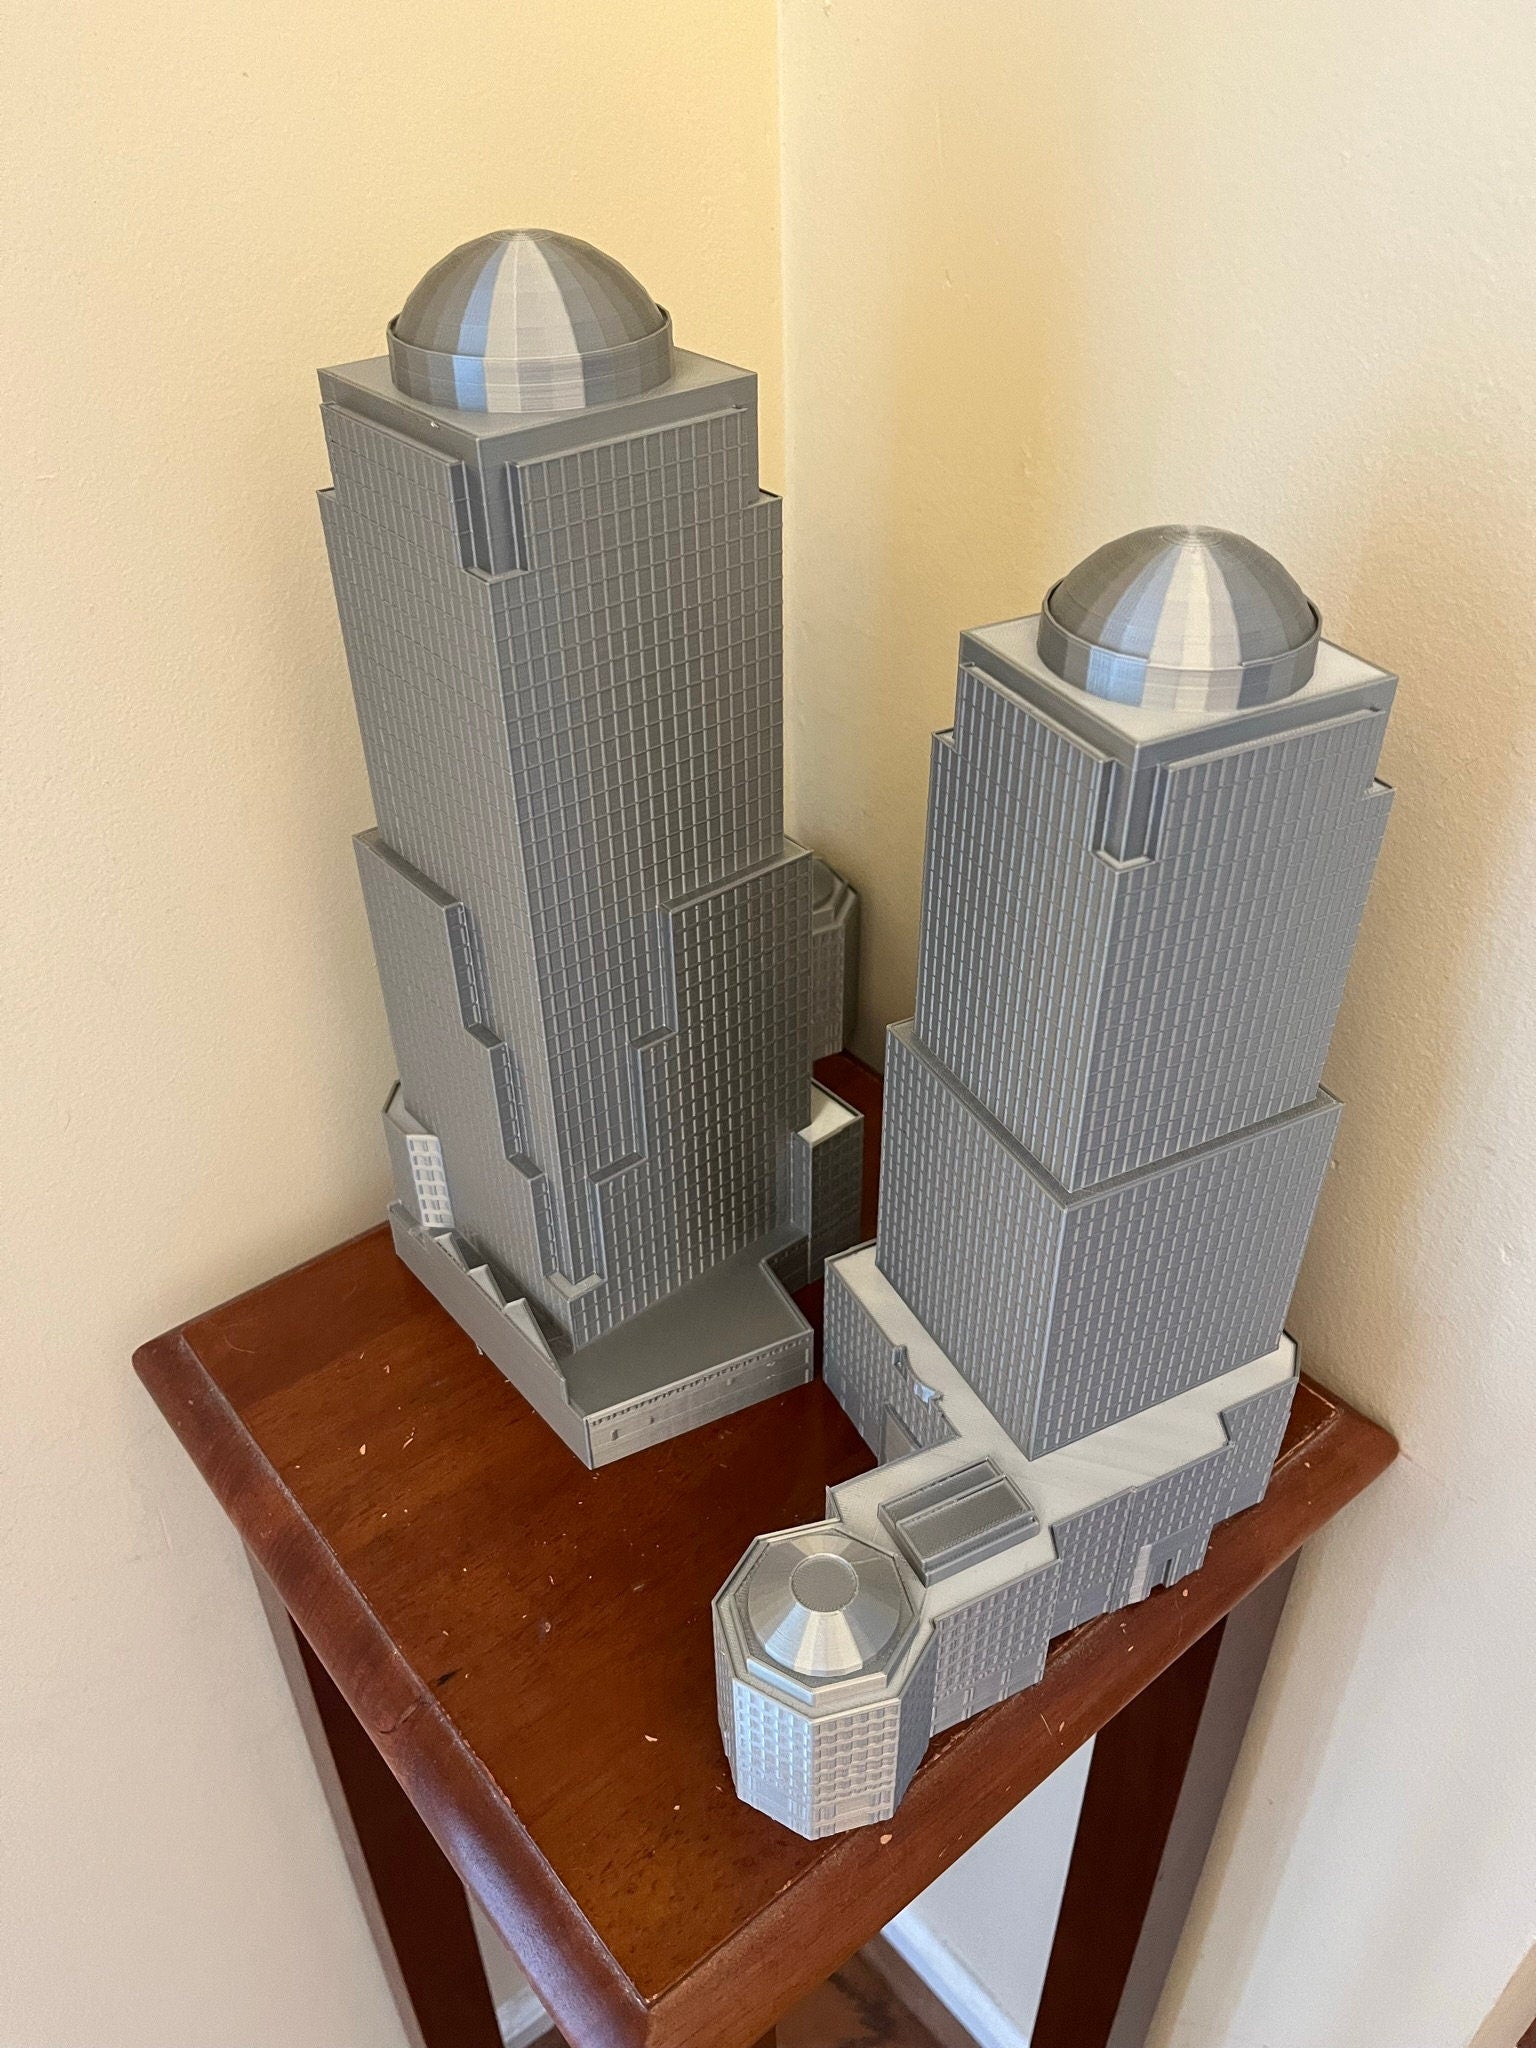 Two World Financial Center Model- 3D Printed